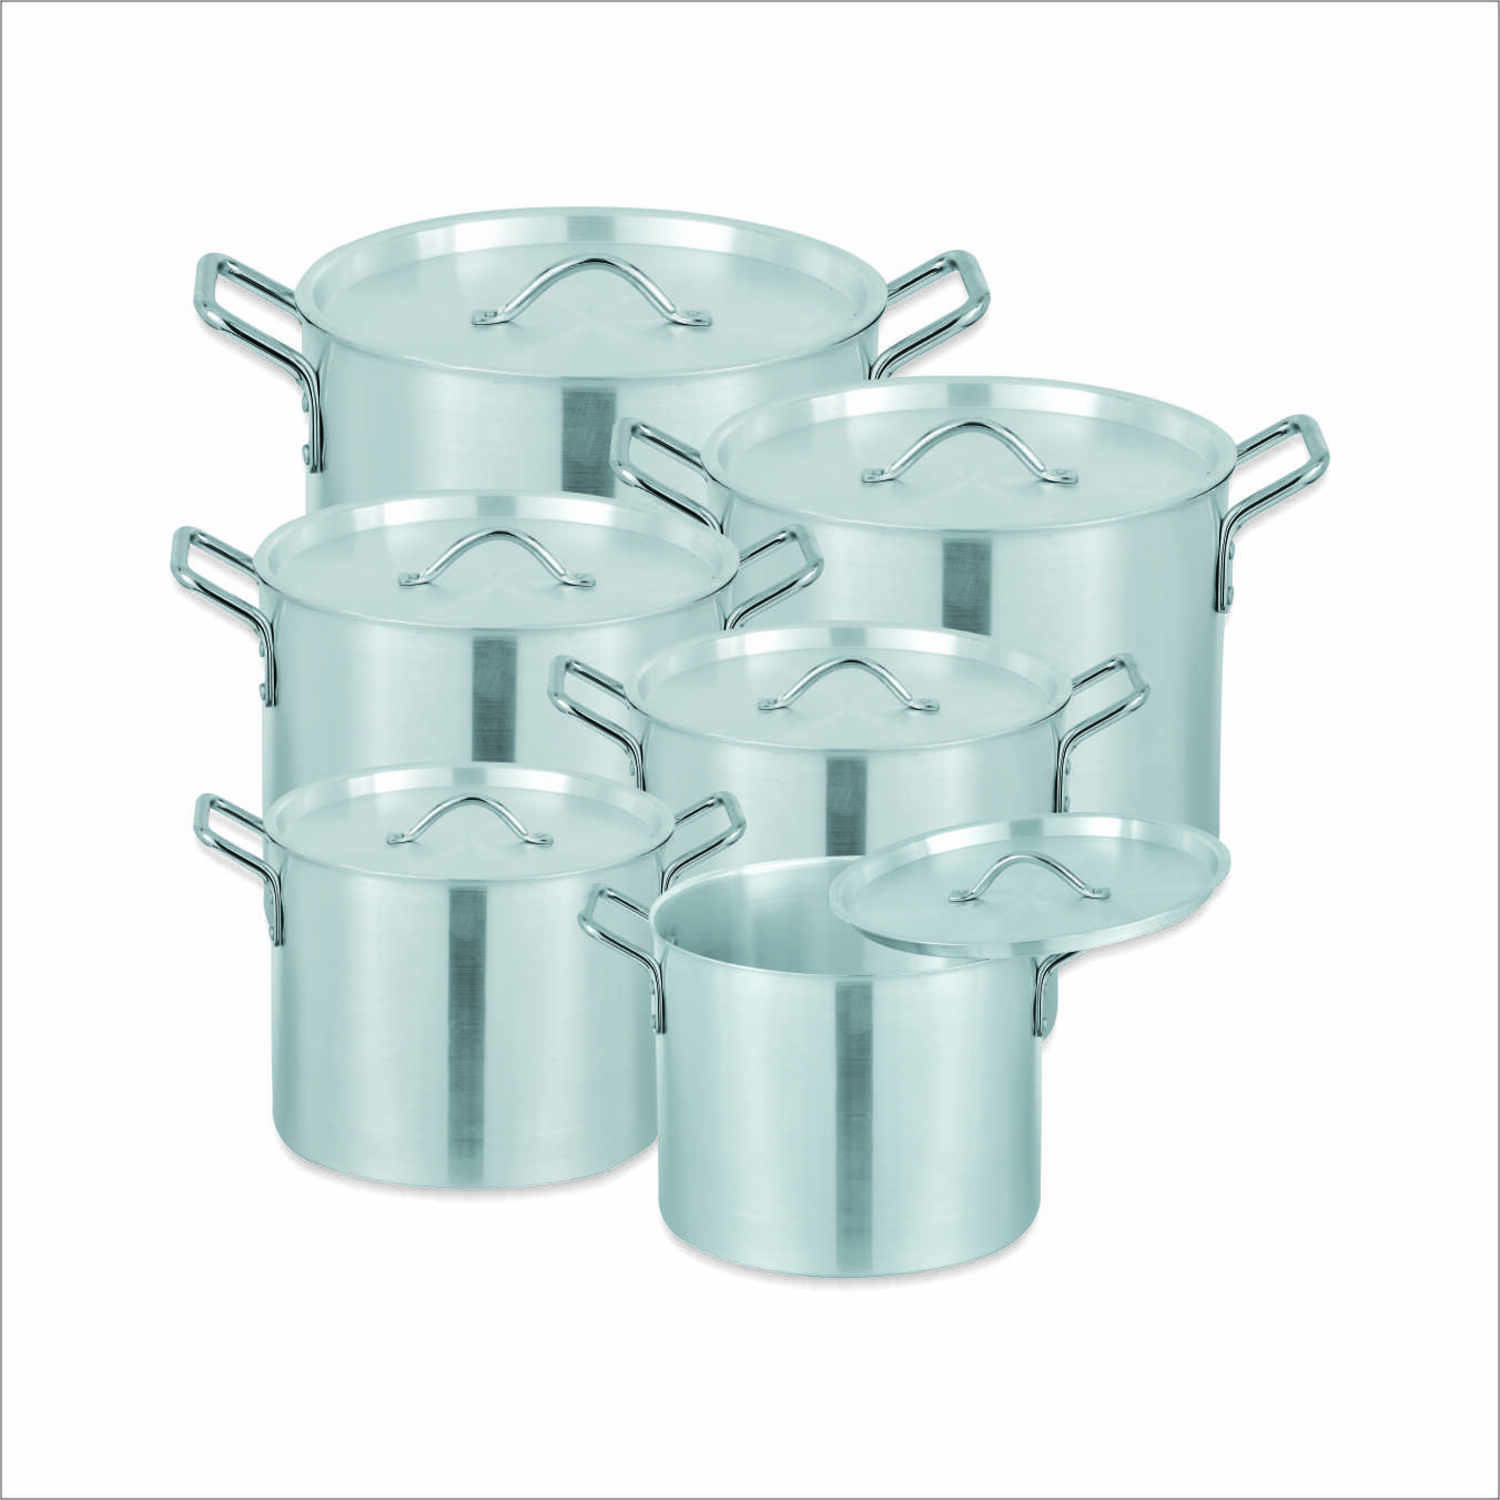 Heavy Metal Finish Light Weight Sonex Home Kitchen Traditional Cooking Pot 6 Pcs Set 1x6 Size 23.5/26/29/30.5/33/35 Cm With Heavy Durable Lid And Handles Original Made In Pakistan